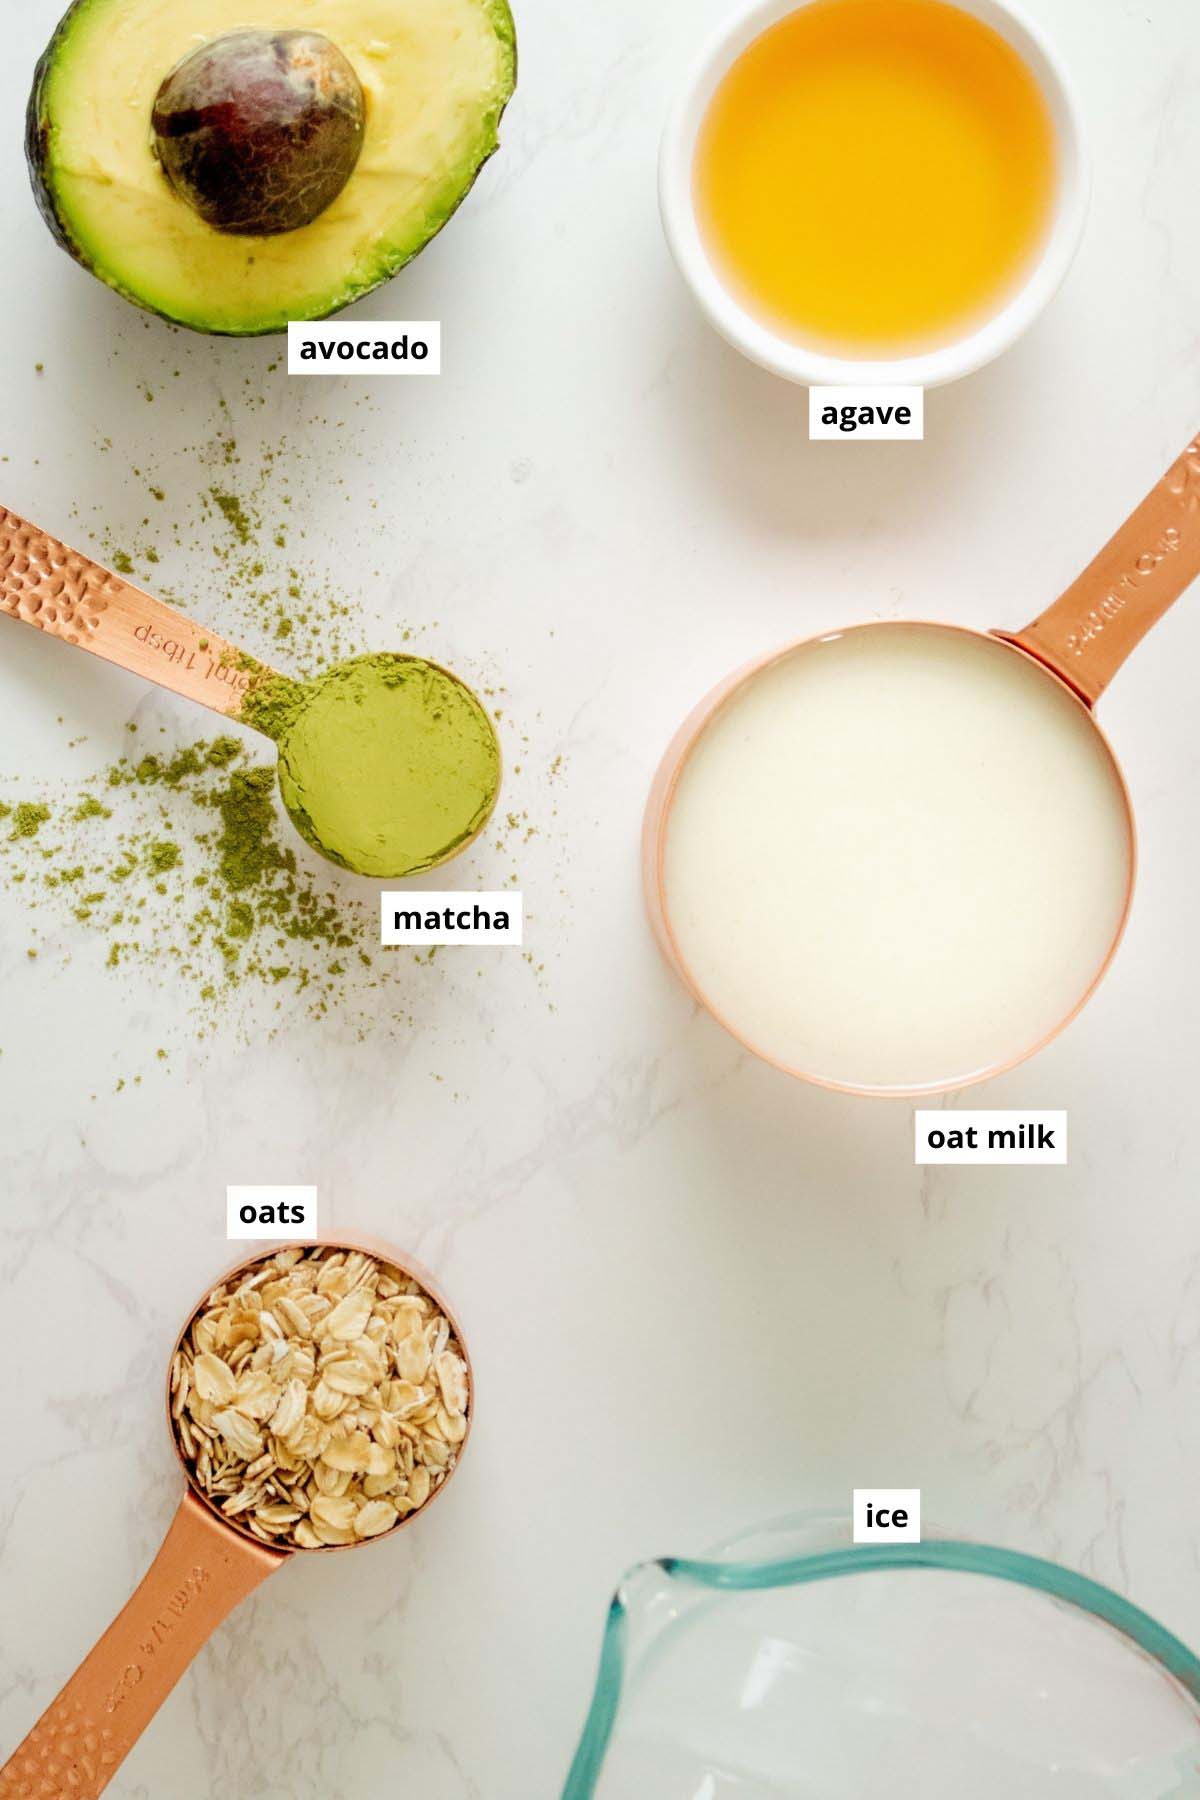 matcha powder, avocado, agave, oat milk, ice, and oats in cups on a white table with text labels on each one